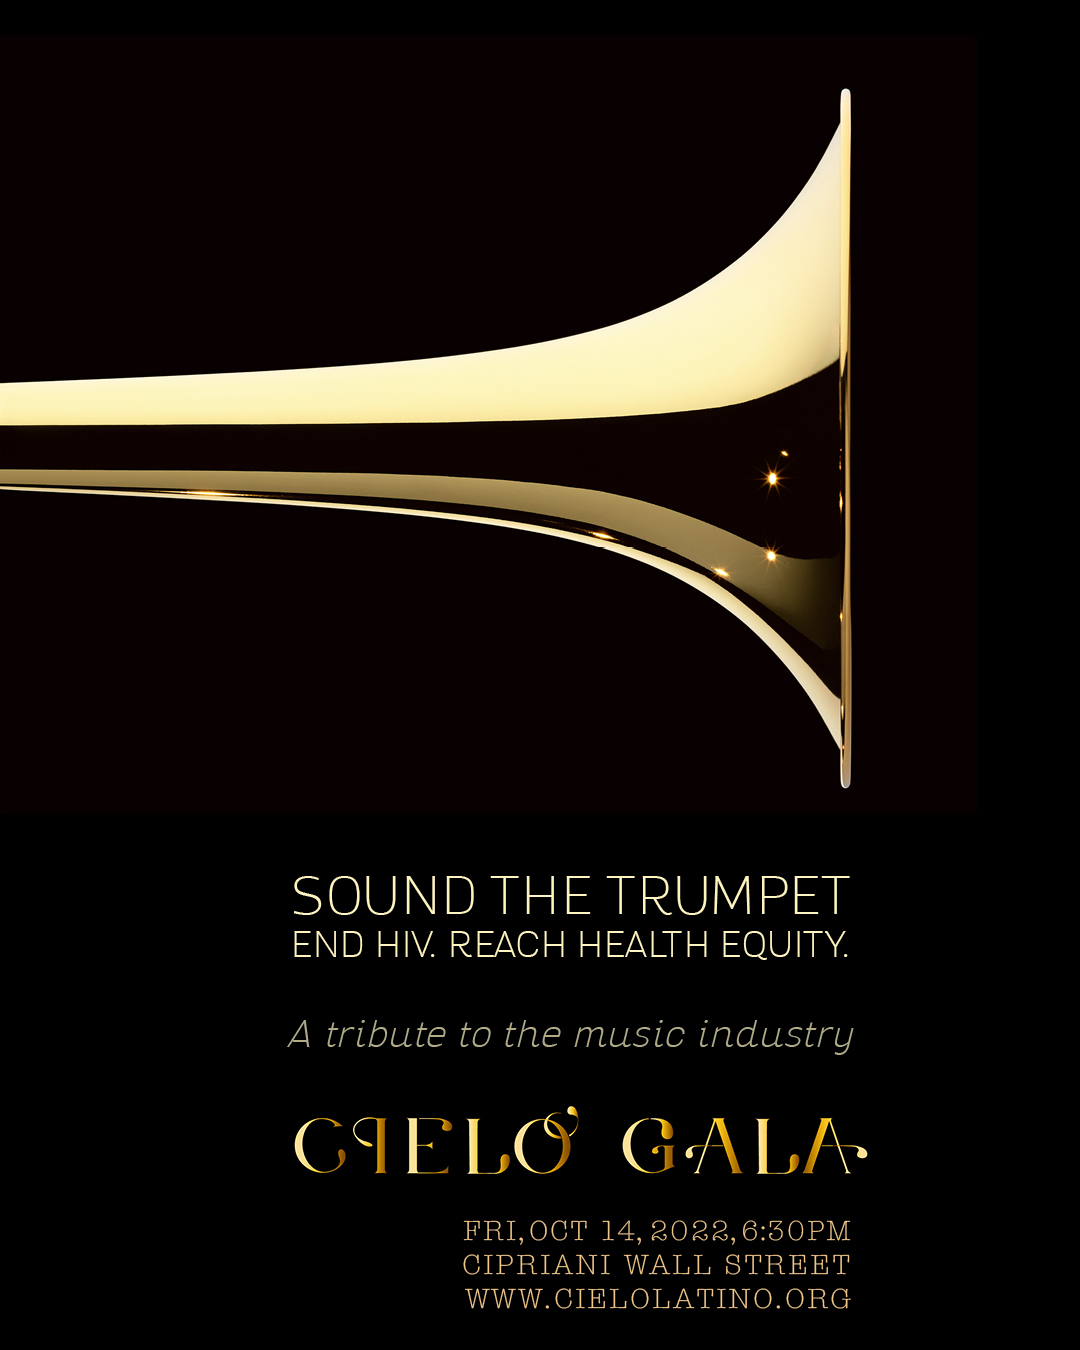 A Gala to Celebrate the work of the Latino Commission on AIDS